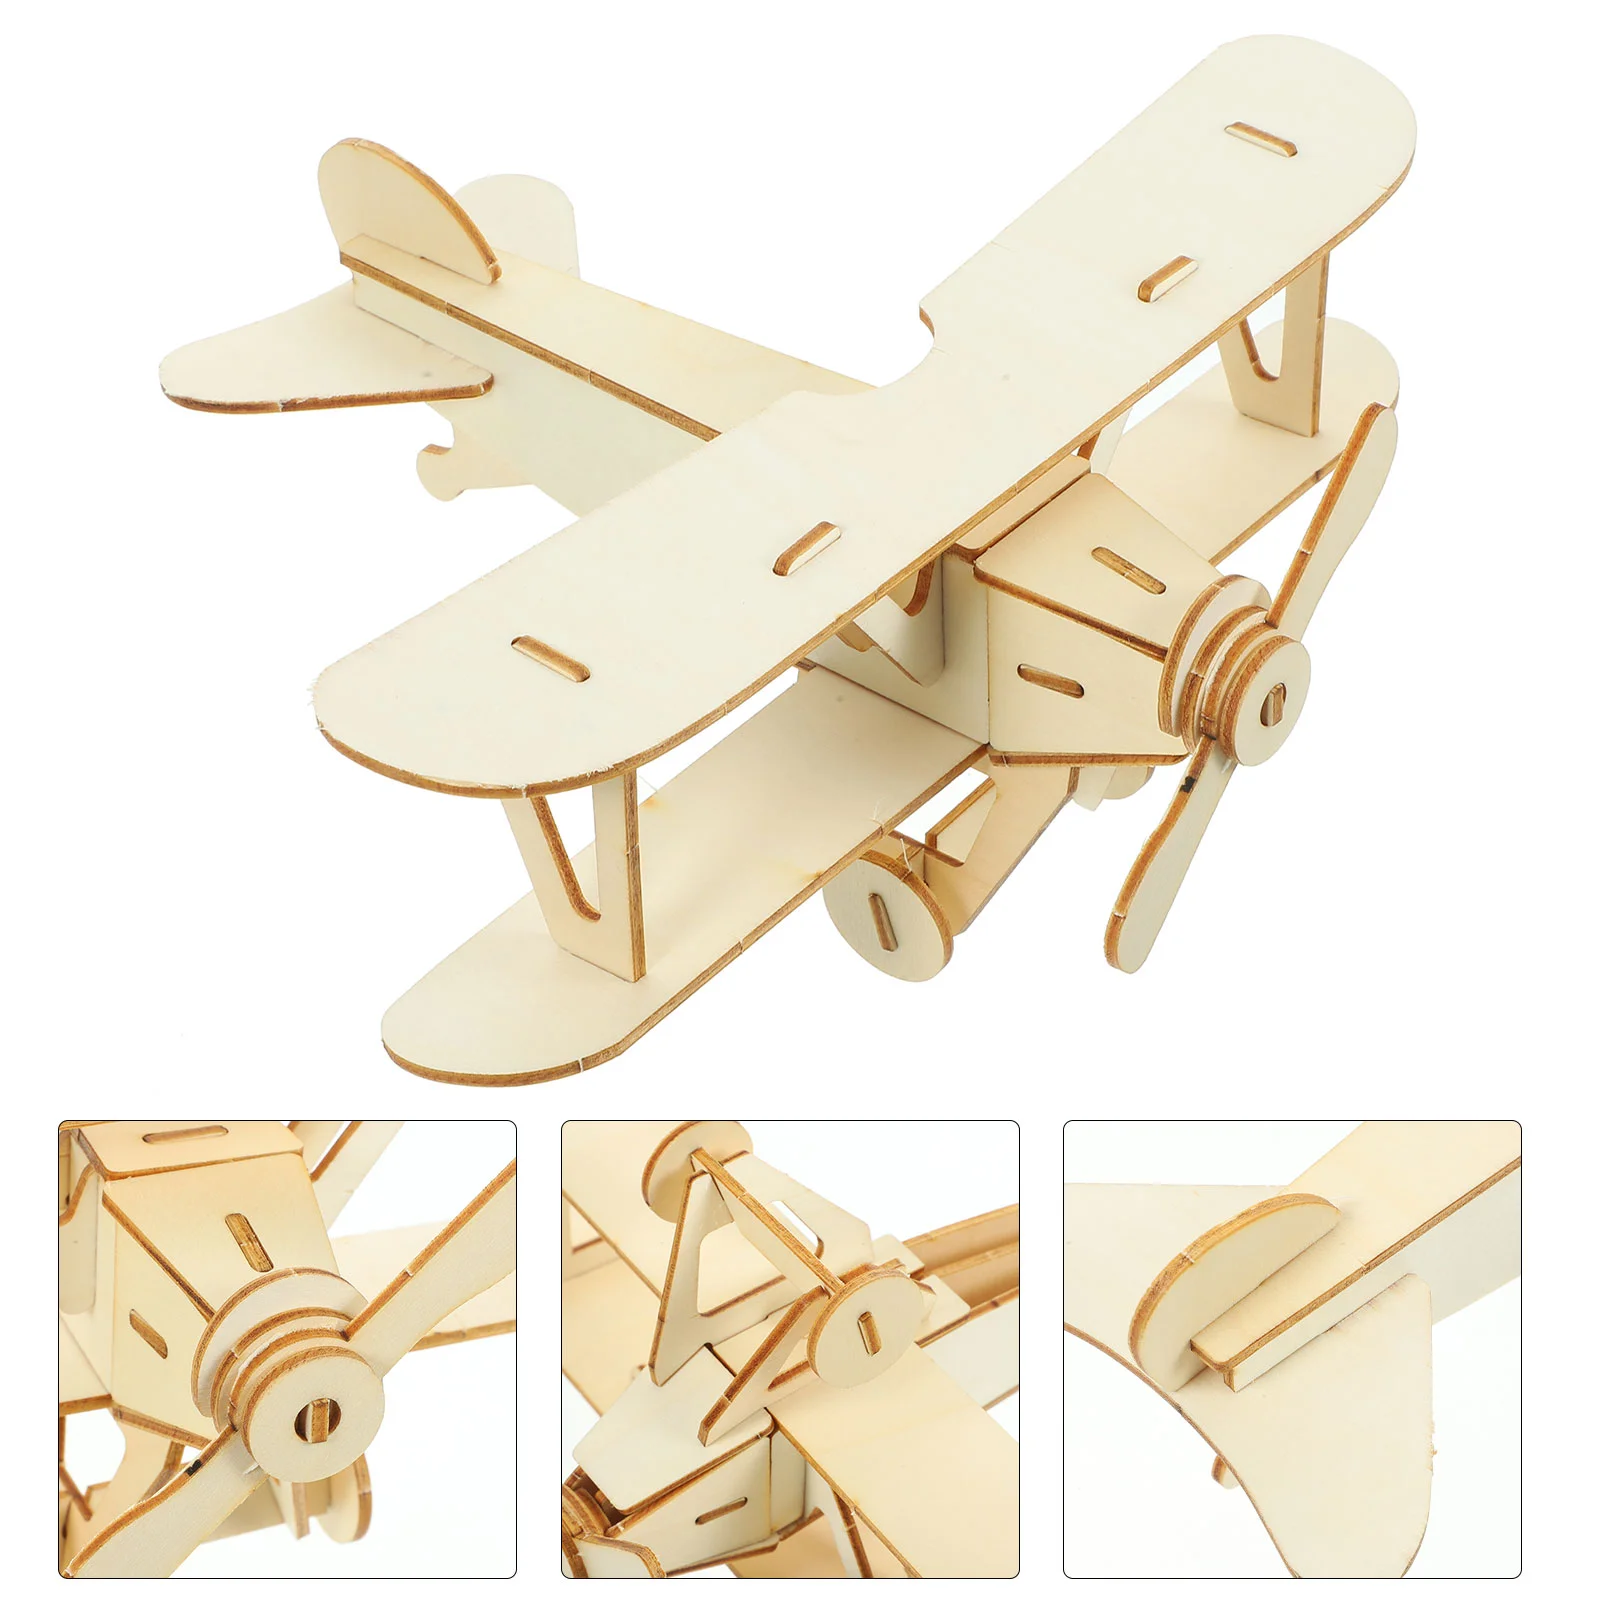 

Puzzled Bundle of Airplanes 3D Wooden Puzzle Model, Airplane Puzzle to Build& for Decoration Metal